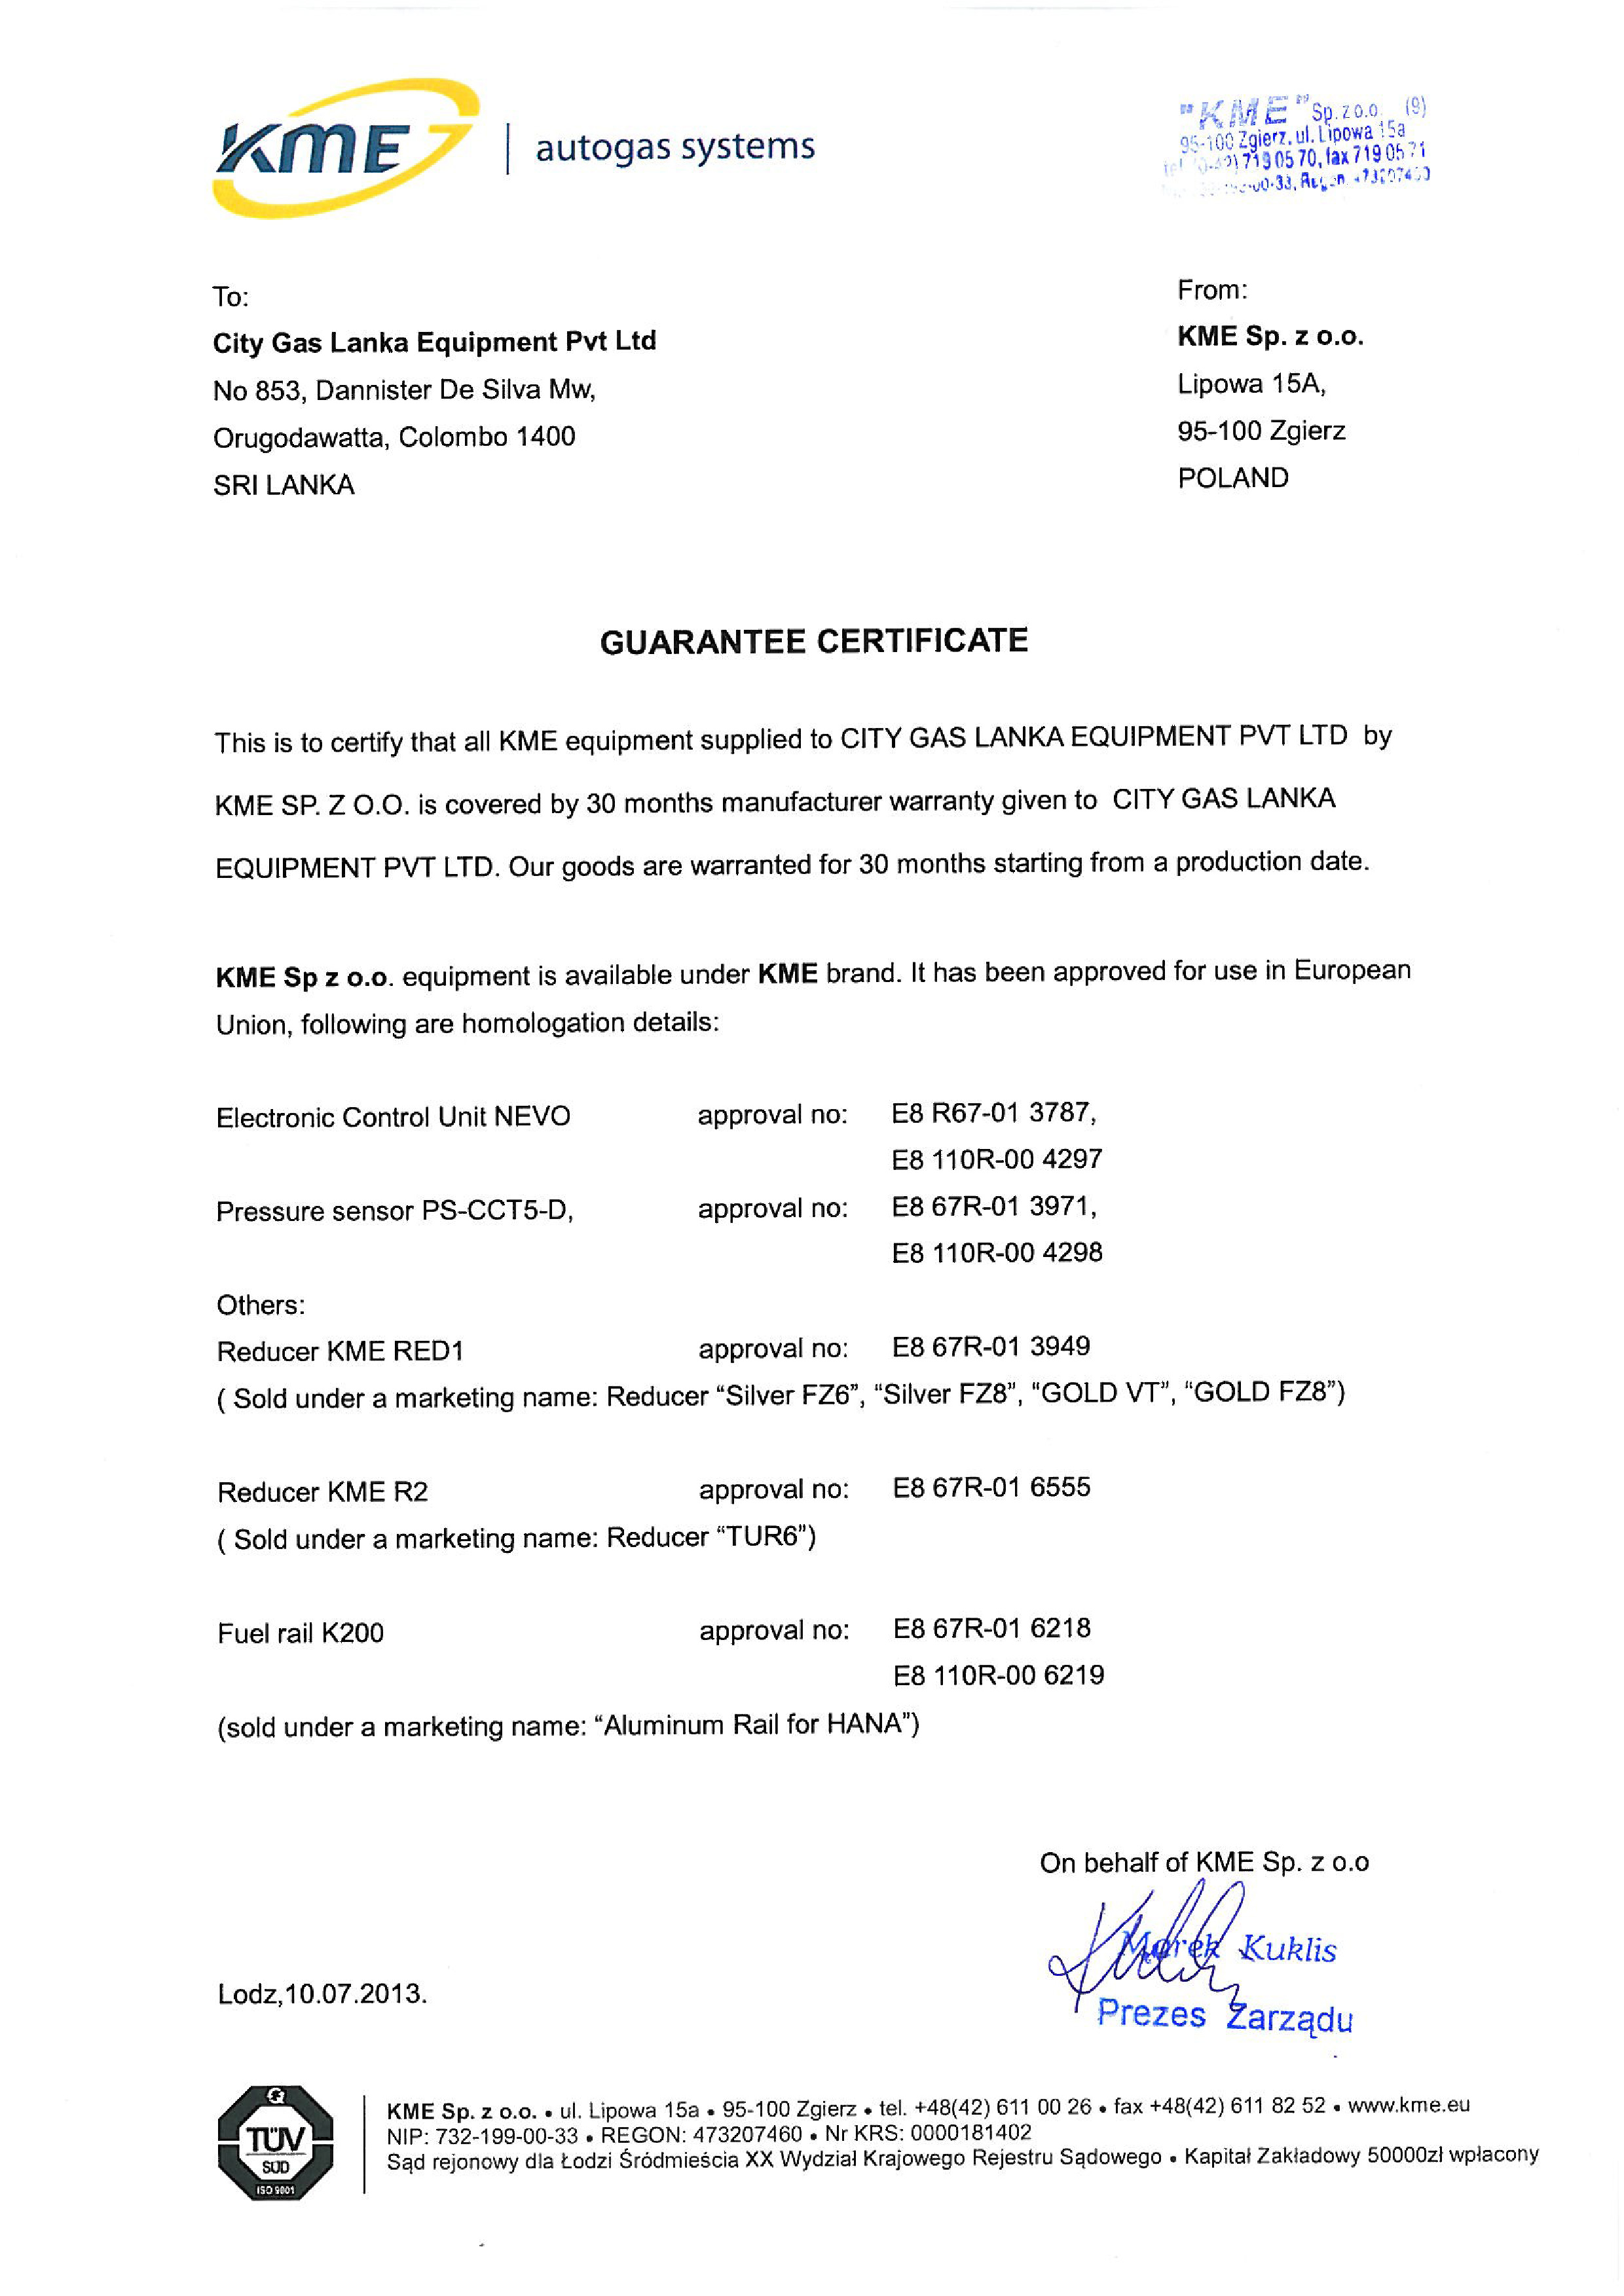 CERTIFICATE OF GUARANTEE FOR CITY GAS LANKA-01